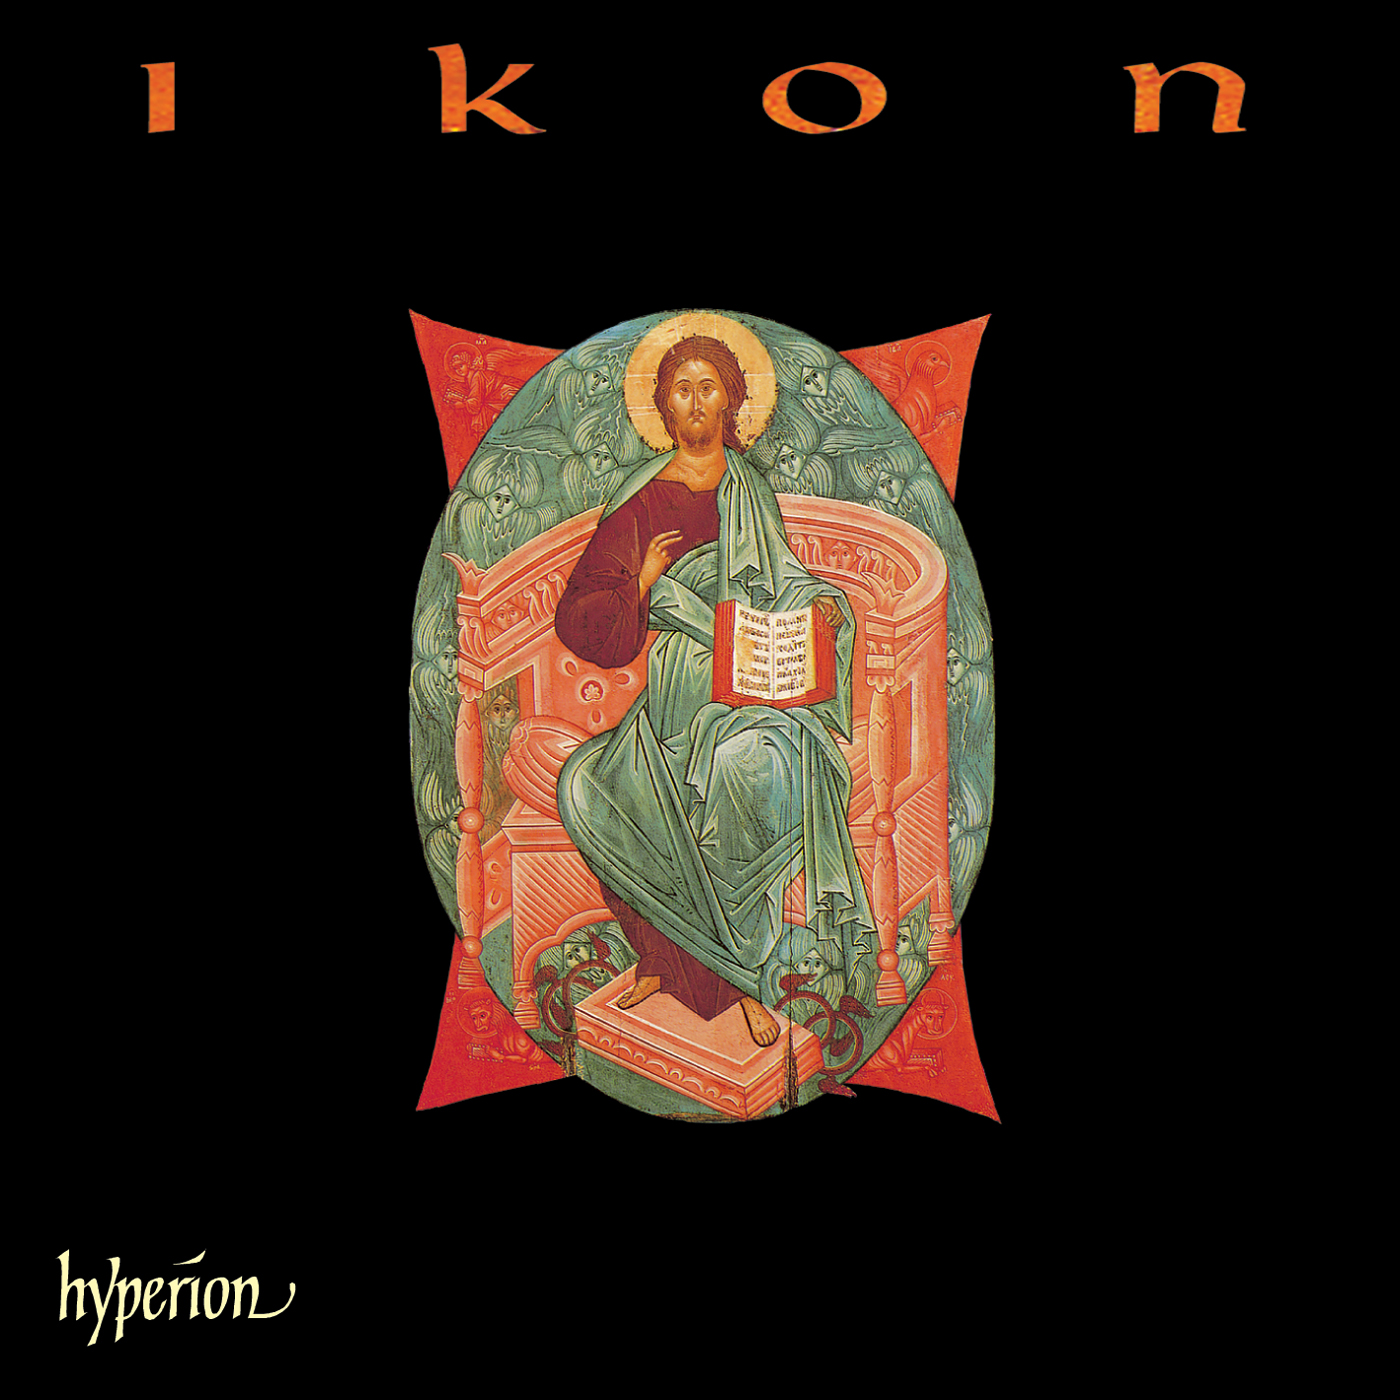 Ikon, Vol. 1 – Sacred Choral Music from Eastern Europe